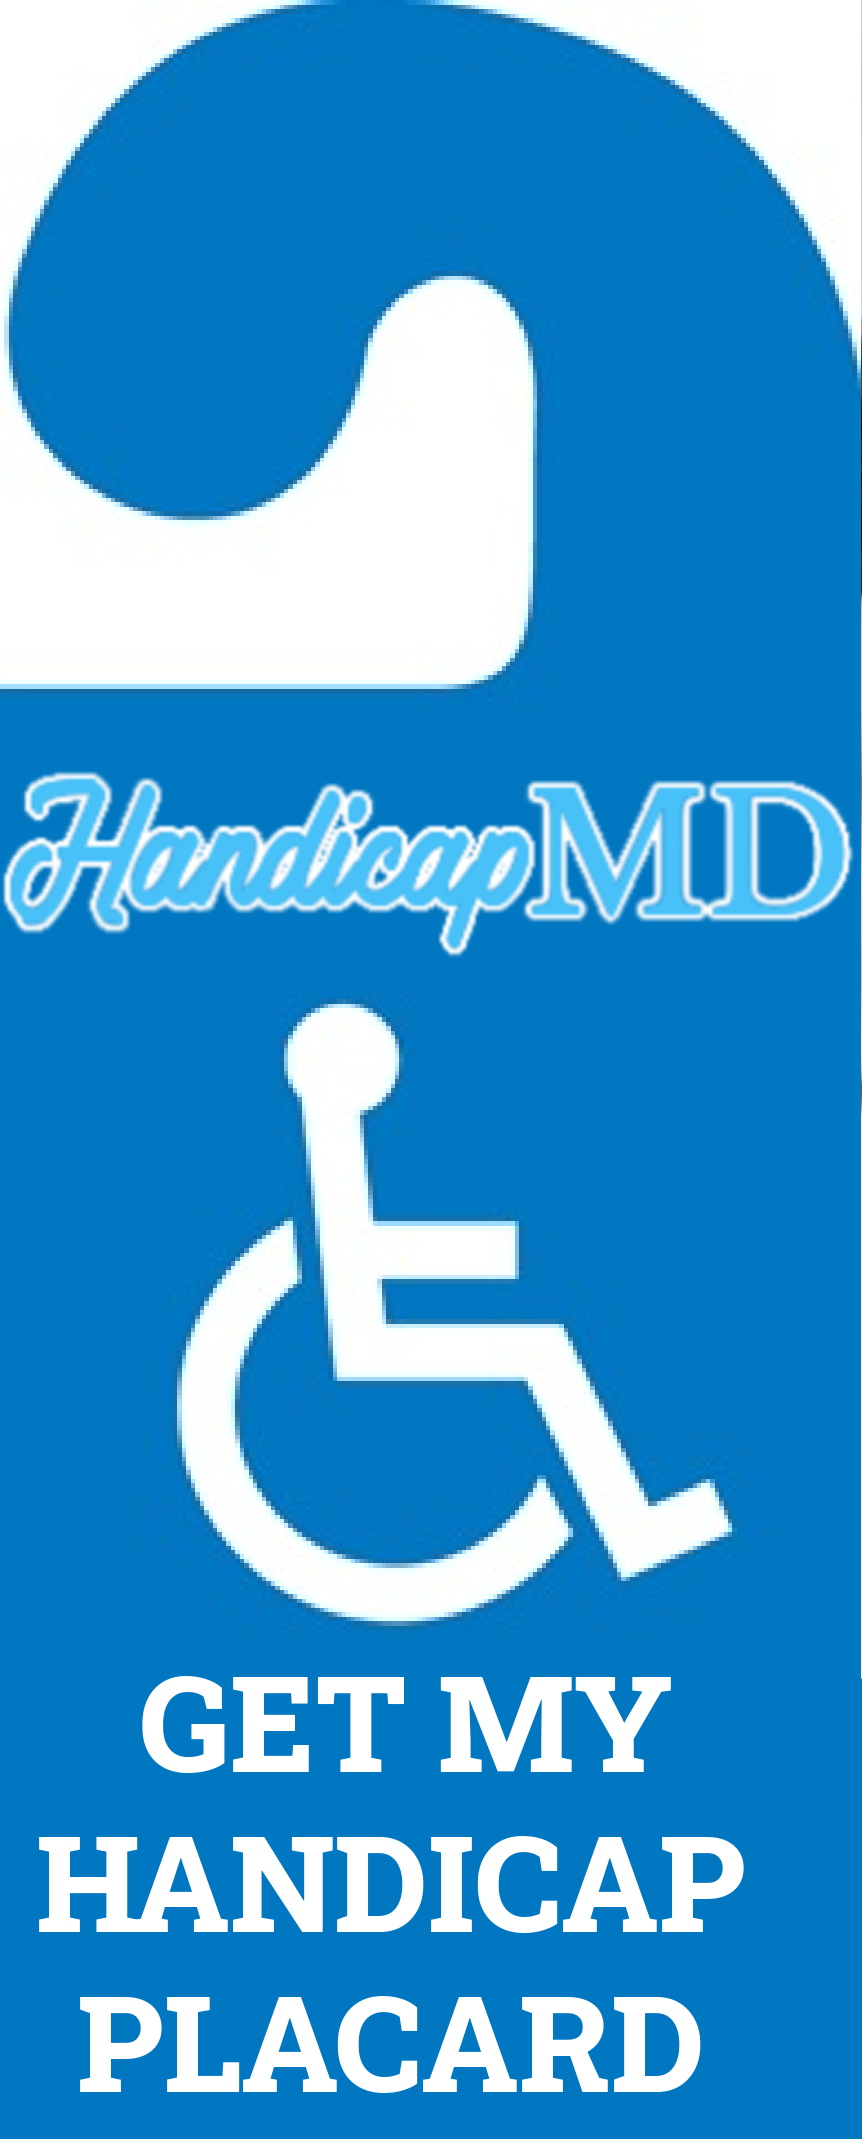 The Impact of Handicap Placard Abuse and How to Report it in Colorado